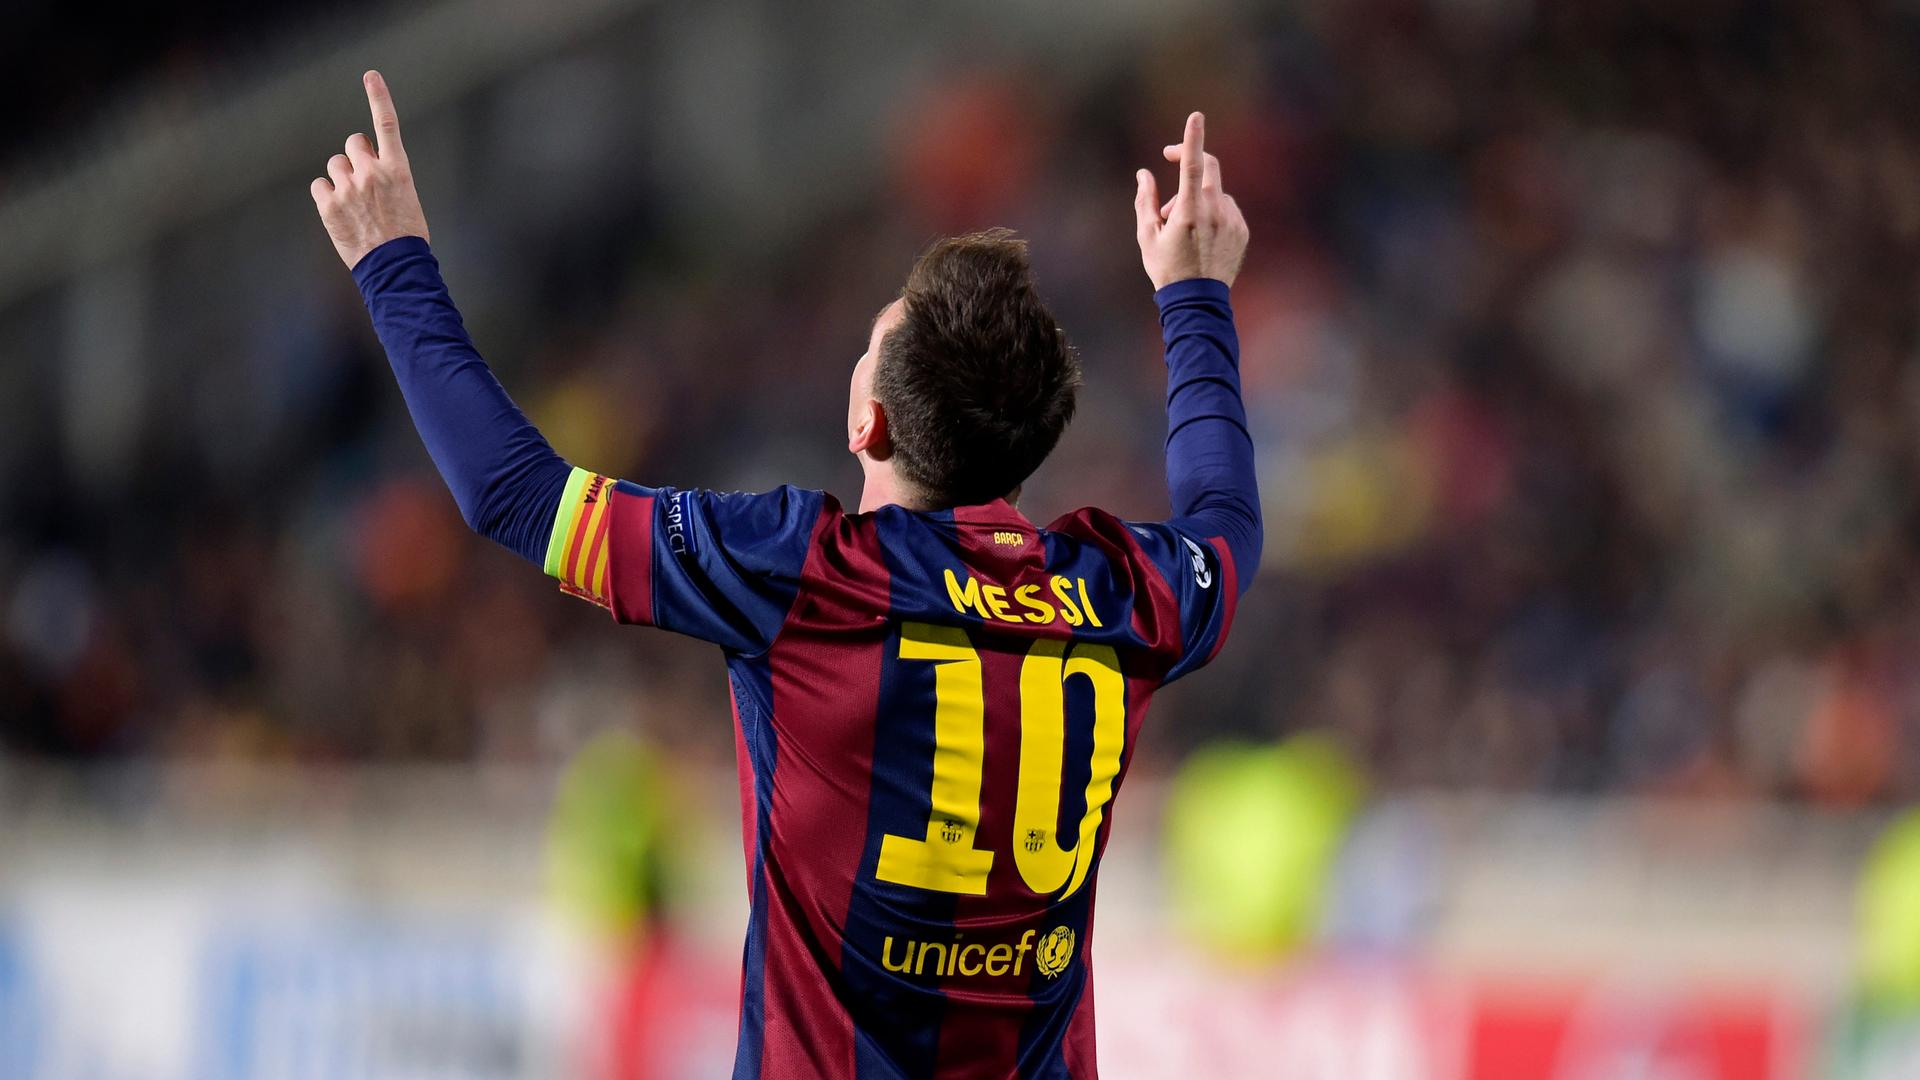 Barcelona's Lionel Messi celebrates after scoring a goal against APOEL Nicosia during their Champions League Group F soccer match in Nicosia November 25, 2014.